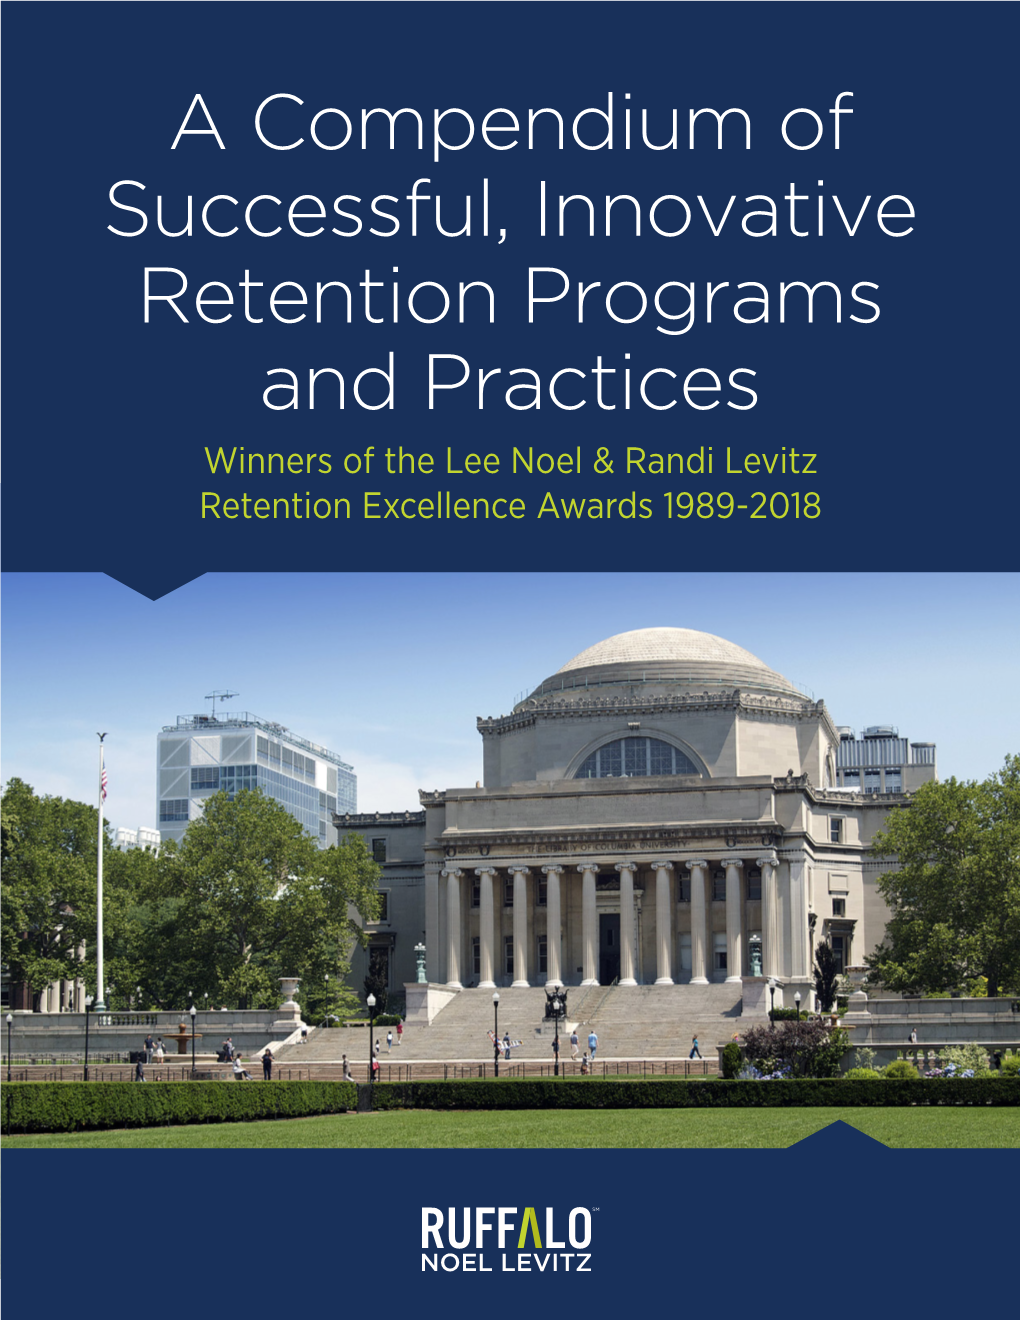 A Compendium of Successful, Innovative Retention Programs and Practices Winners of the Lee Noel & Randi Levitz